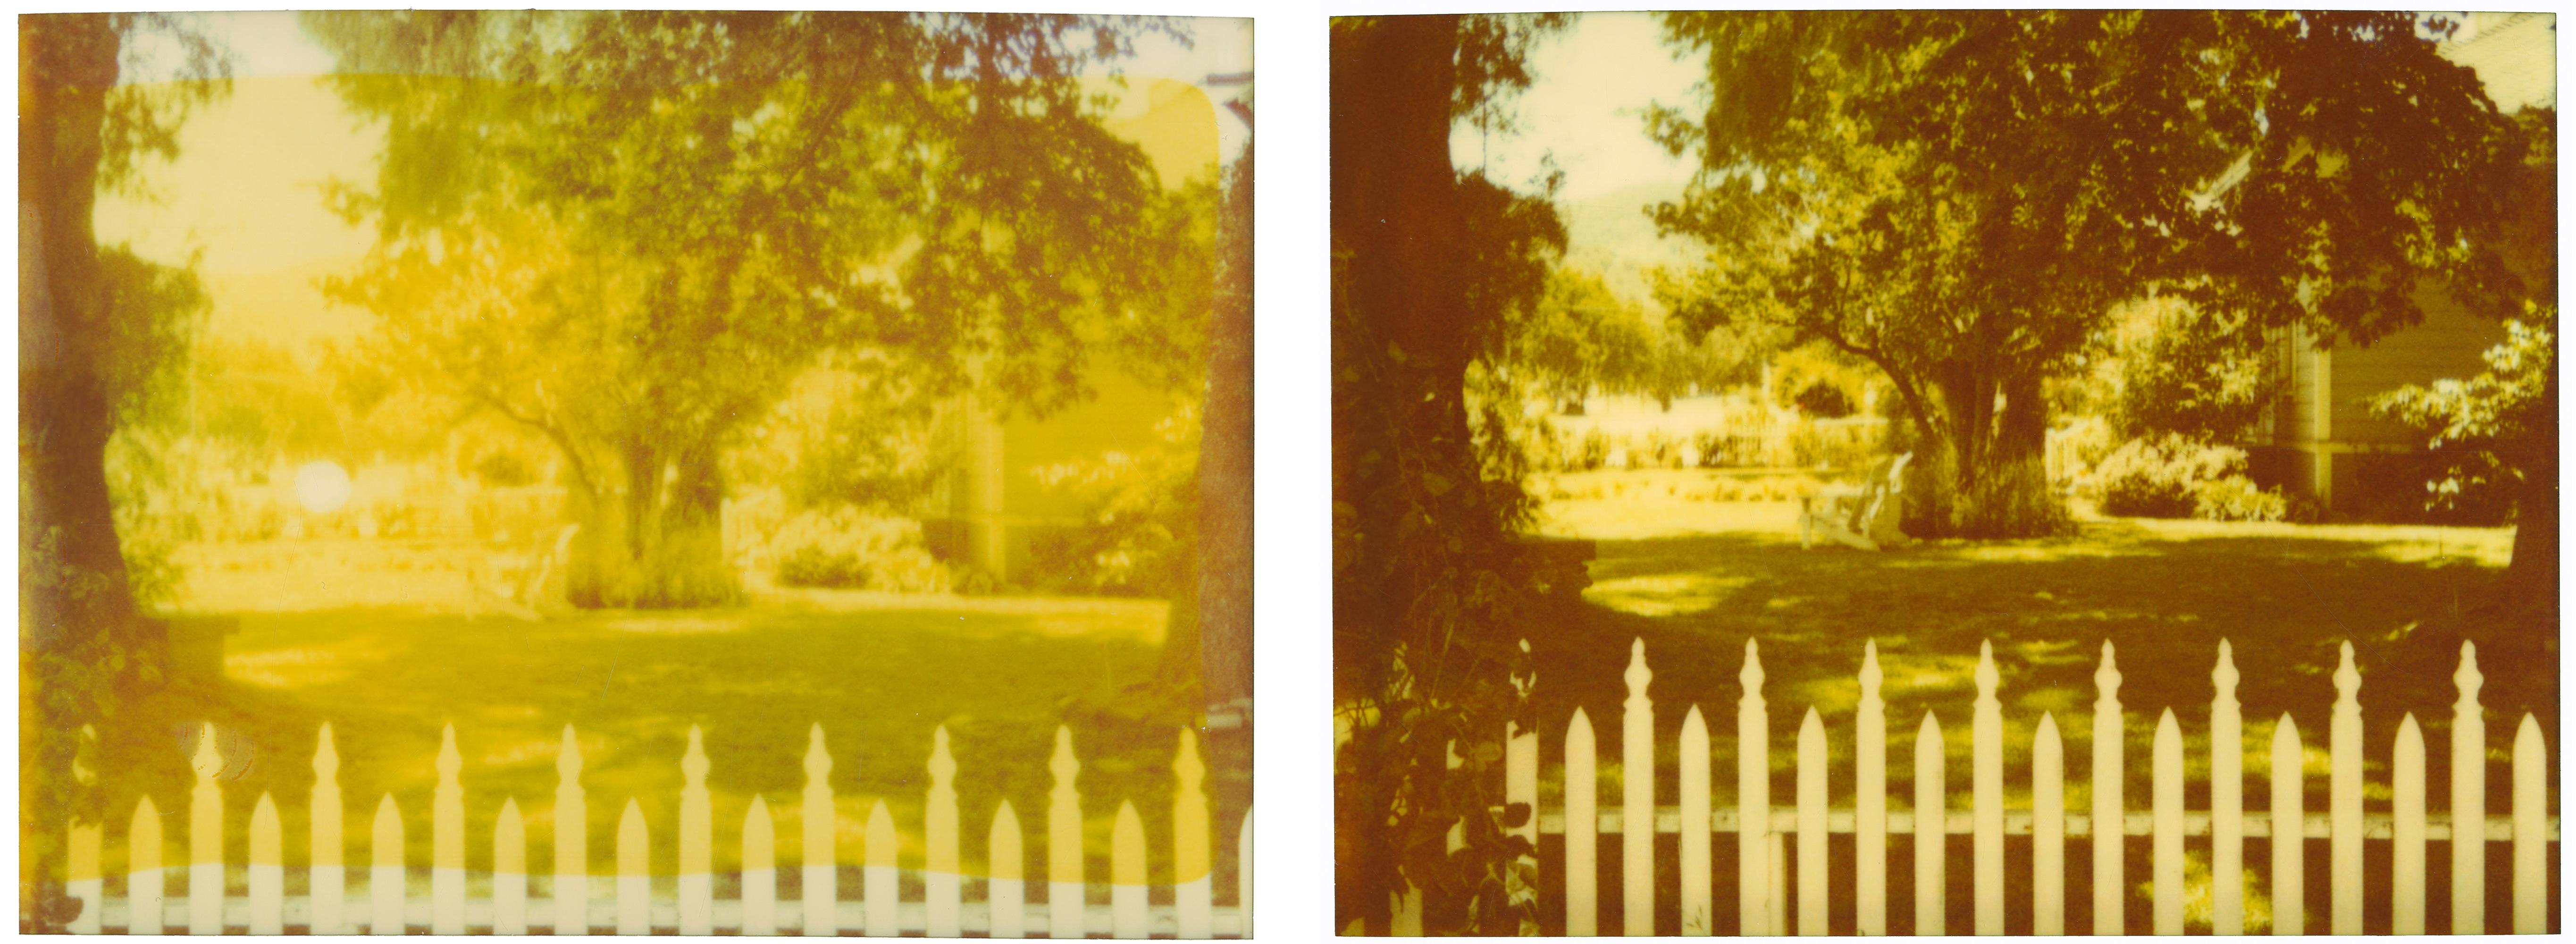 Stefanie Schneider Color Photograph - White Picket Fence (Suburbia), diptych, analog, mounted, Polaroid, Photograph